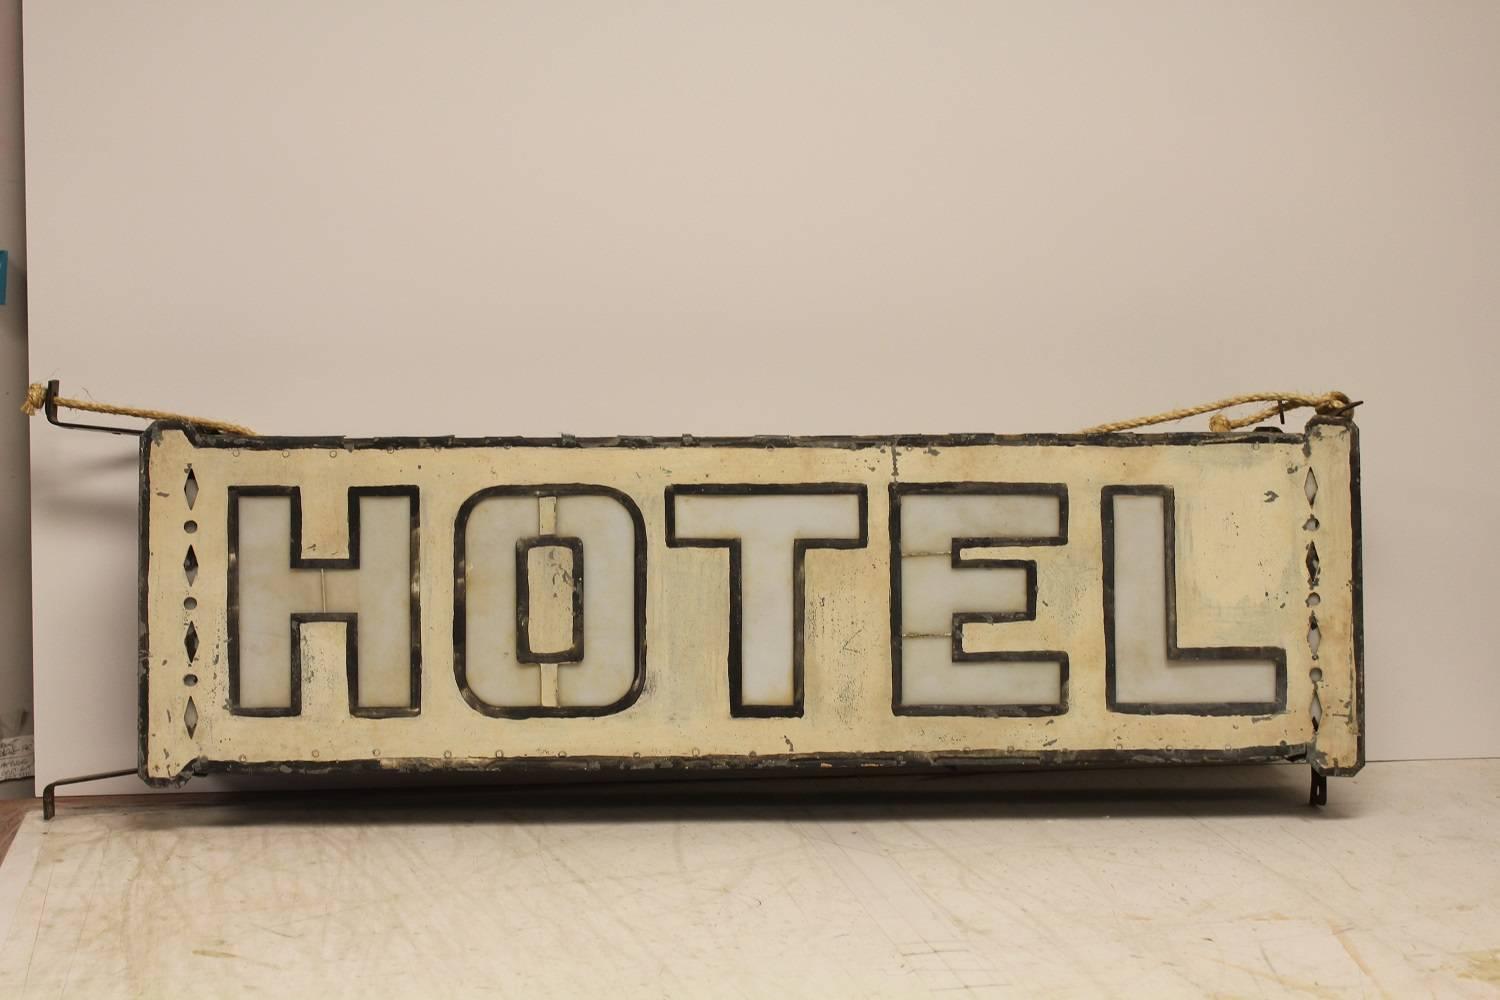 Early 1900s double-sided light up HOTEL sign with milk glass letters. Rewired and in working condition. Original paint.